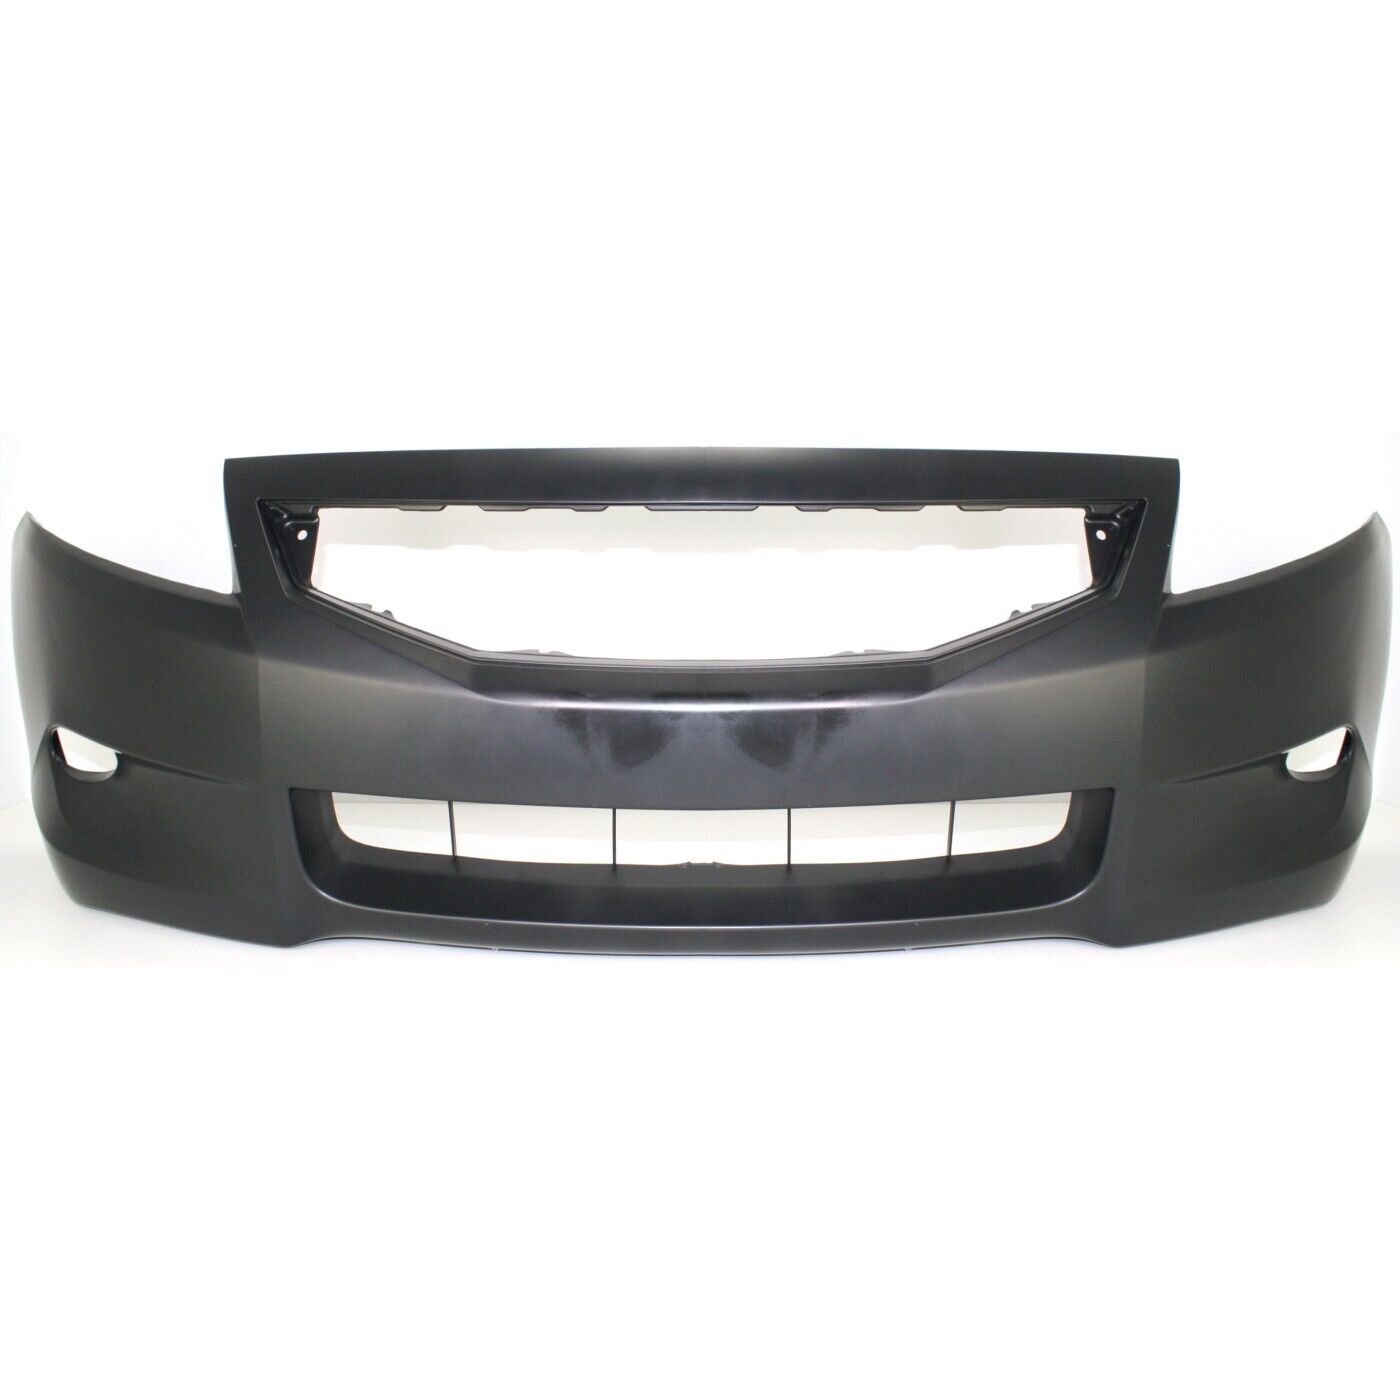 NEW Primed - Front Bumper Cover Fascia for 2008-2010 Honda Accord Coupe 2 Door